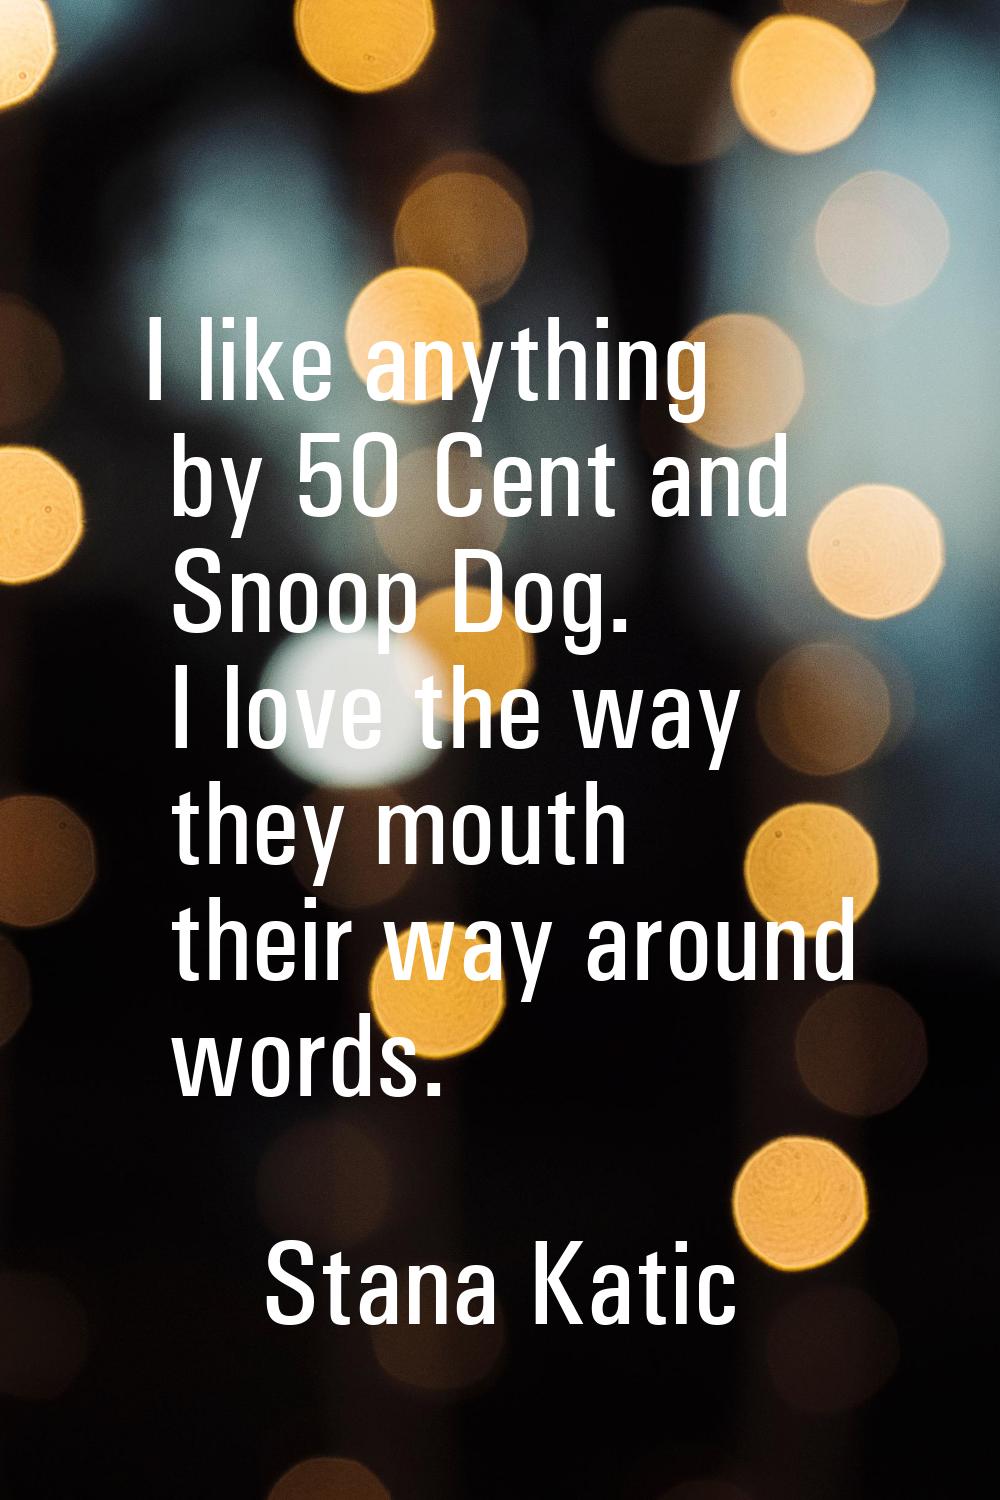 I like anything by 50 Cent and Snoop Dog. I love the way they mouth their way around words.